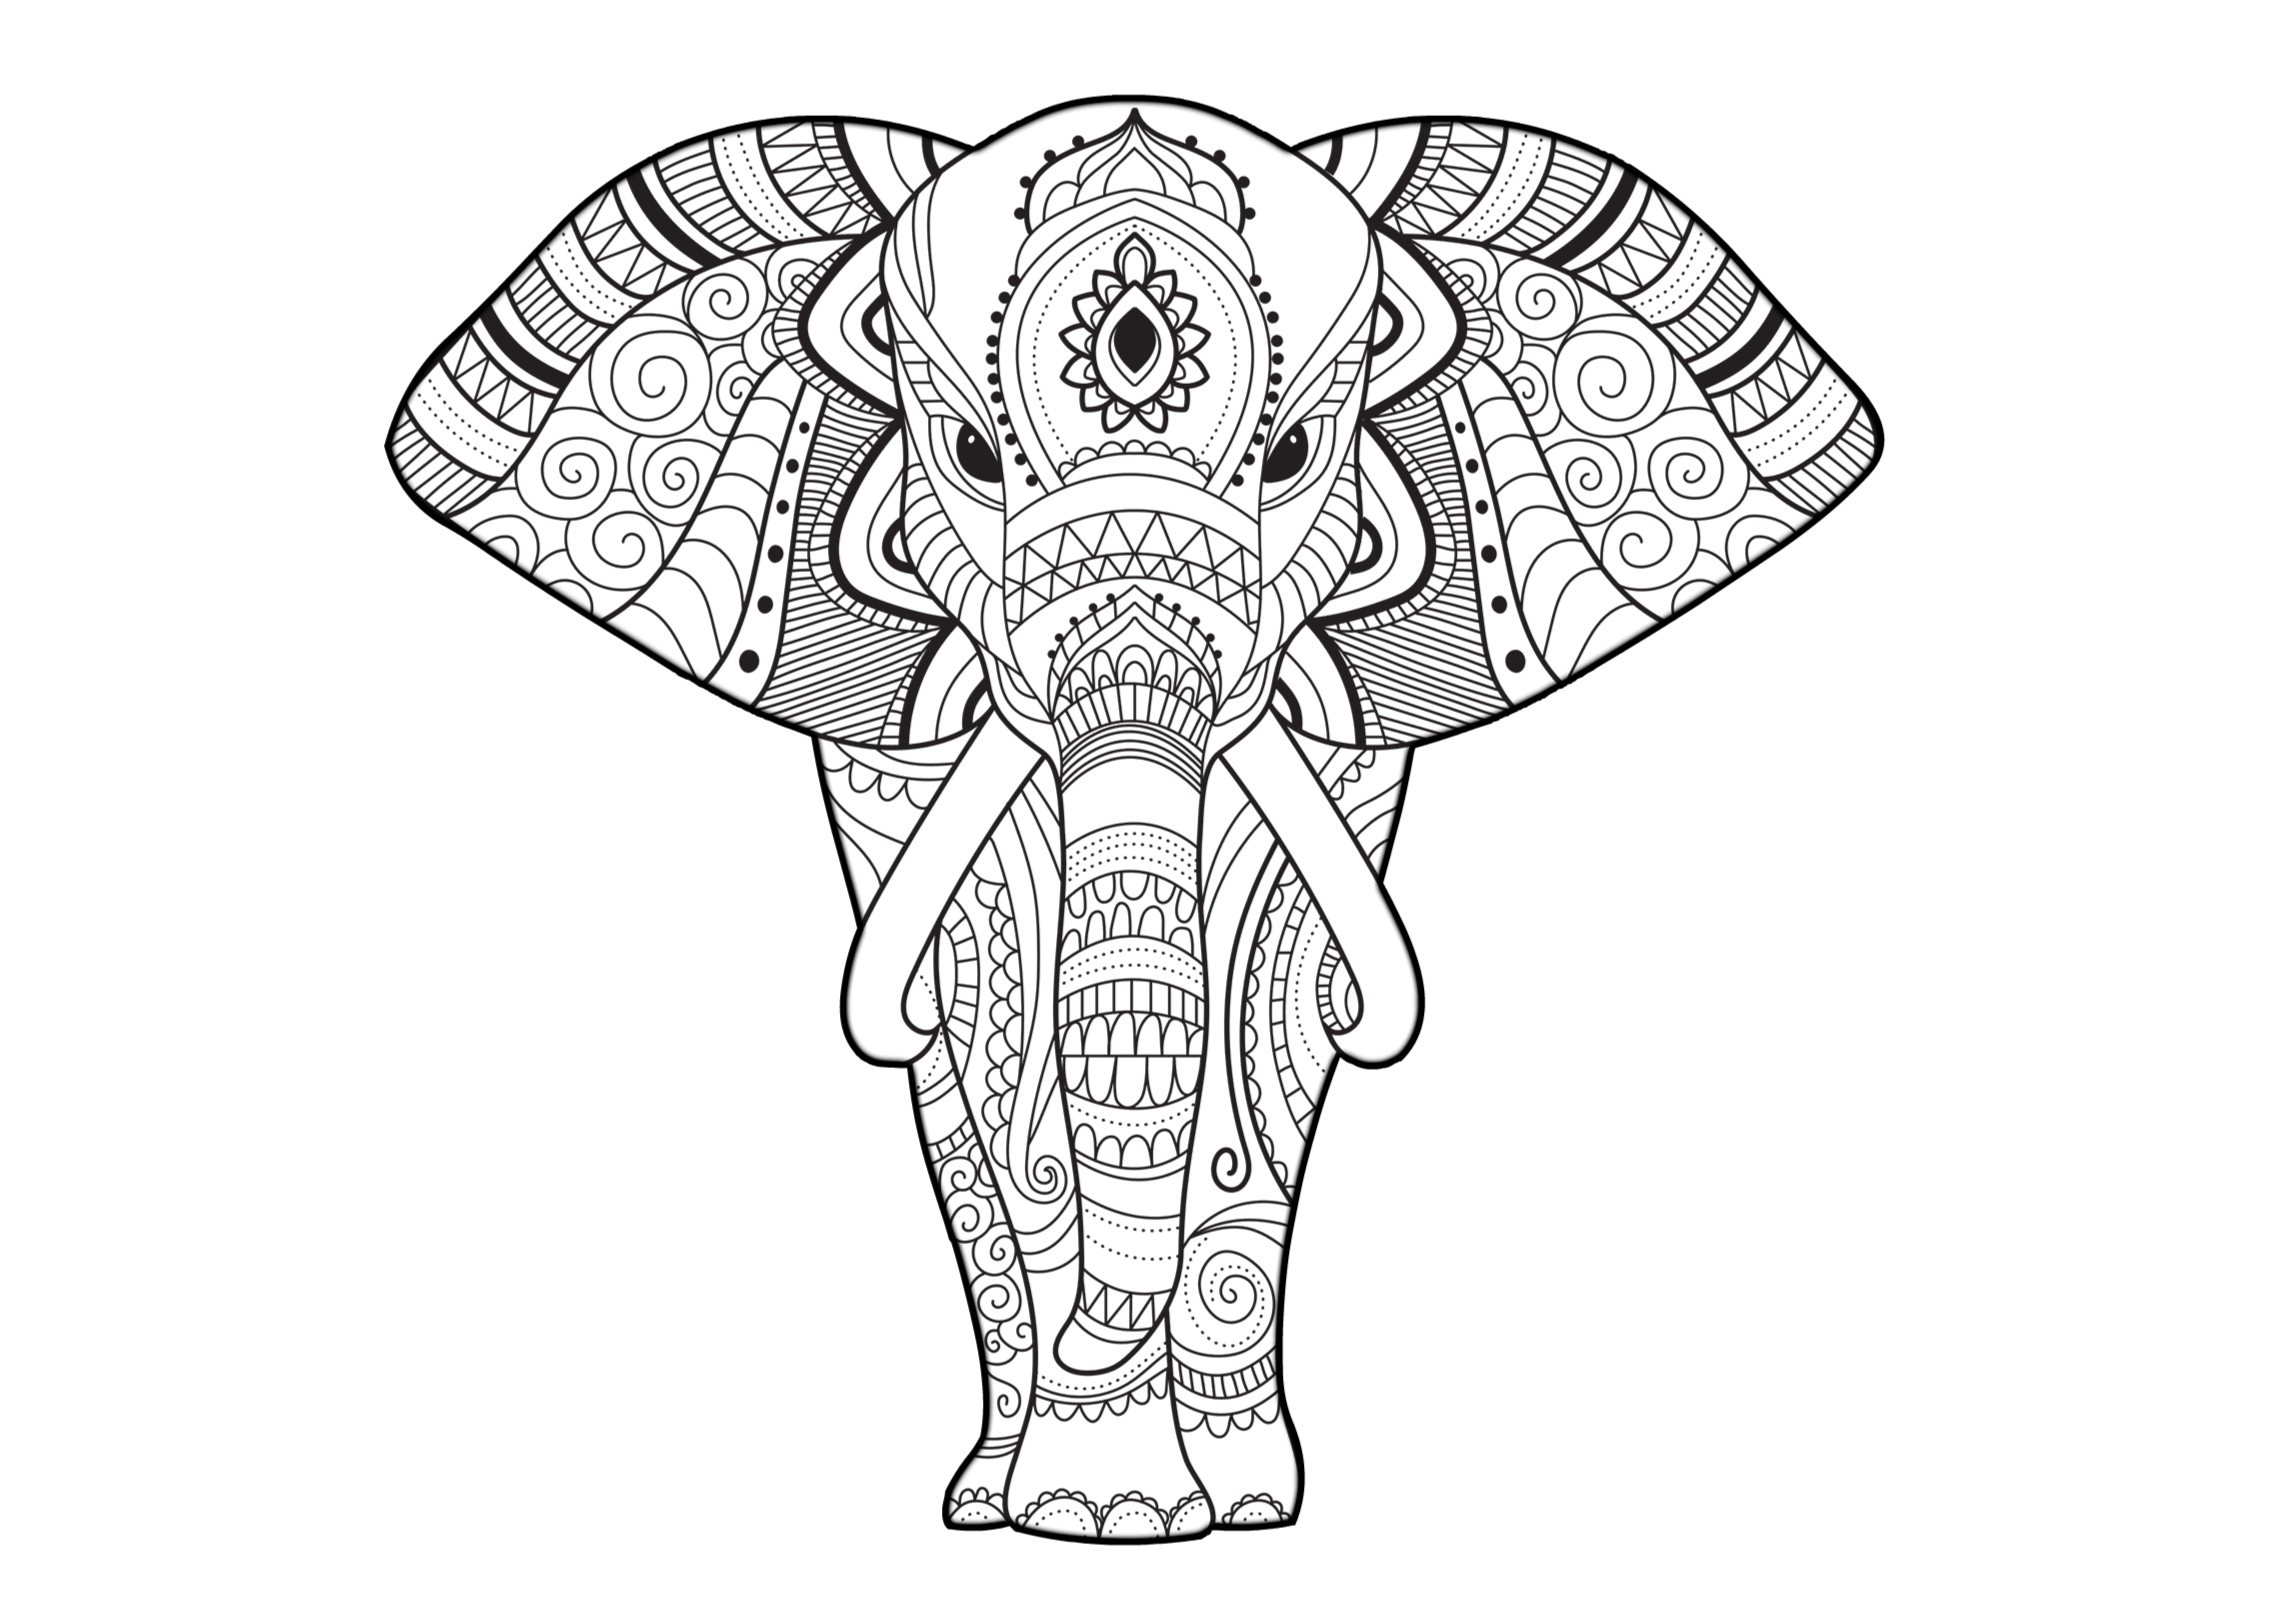 Download Hard to Color Elephant Mandala Coloring Pages for Adults ...